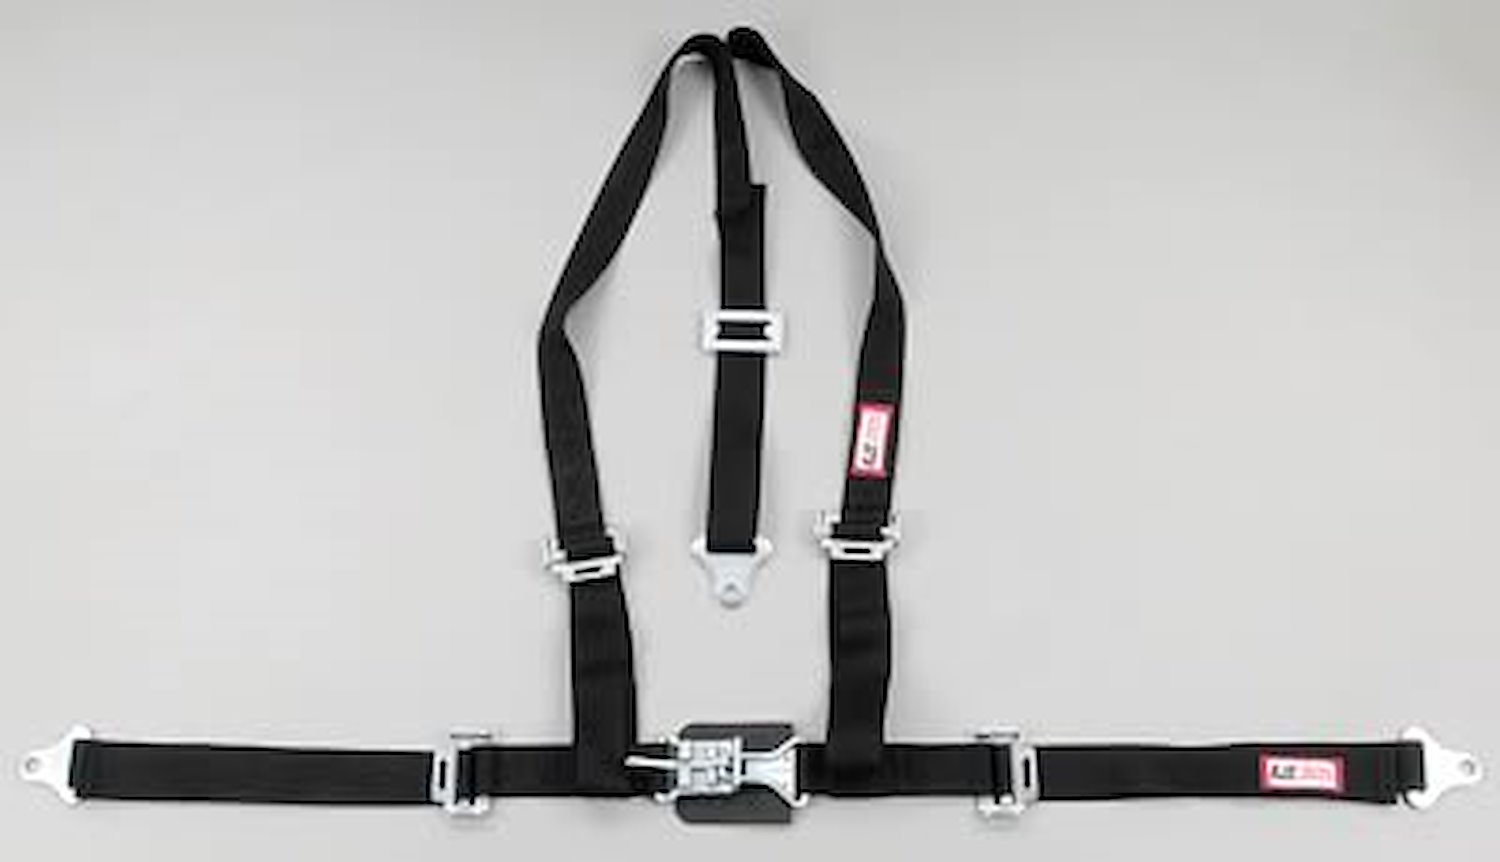 NON-SFI L&L HARNESS 2 PULL UP Lap Belt SEWN IN 2 S.H. Individual ROLL BAR Mount w/STERNUM STRAP ALL WRAP ENDS BLUE